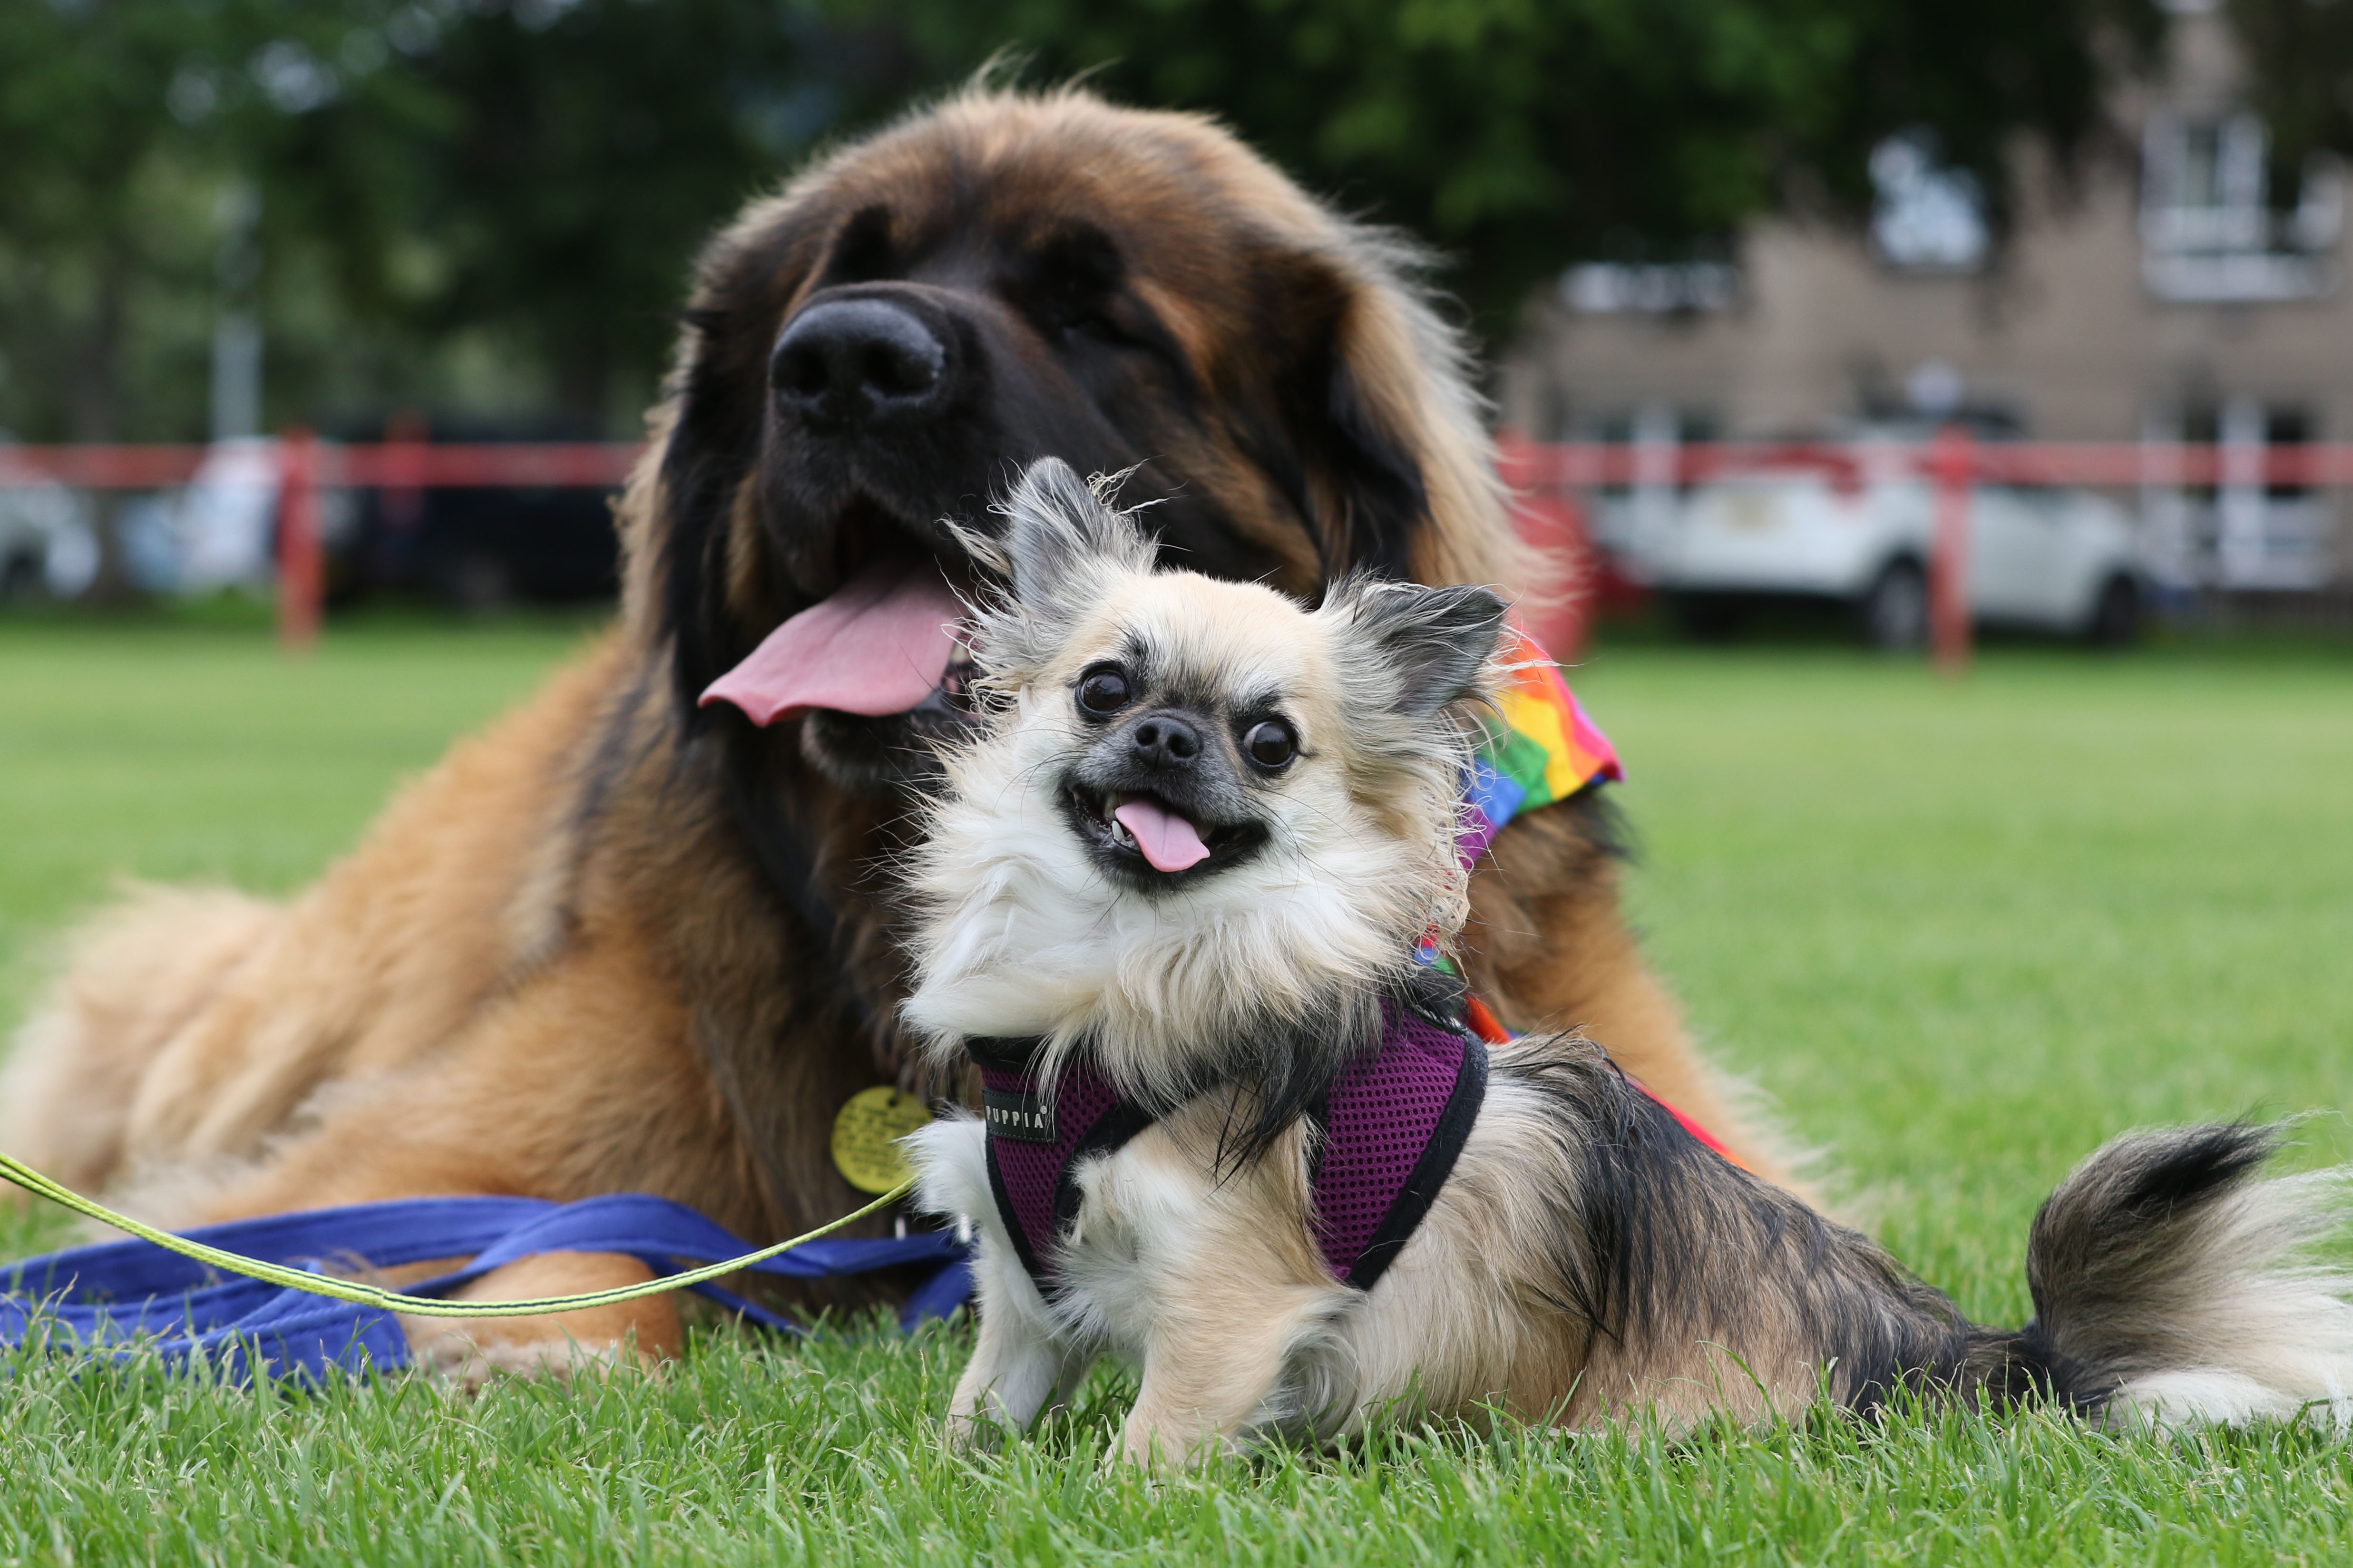 One of the smallest dogs in the competition, Benji, a 1-year-old chihuahua, with the largest, Bismarck the 4-year-old Leonberger. Bismarck won 1st place in the best male category, and Benji won 2nd place.